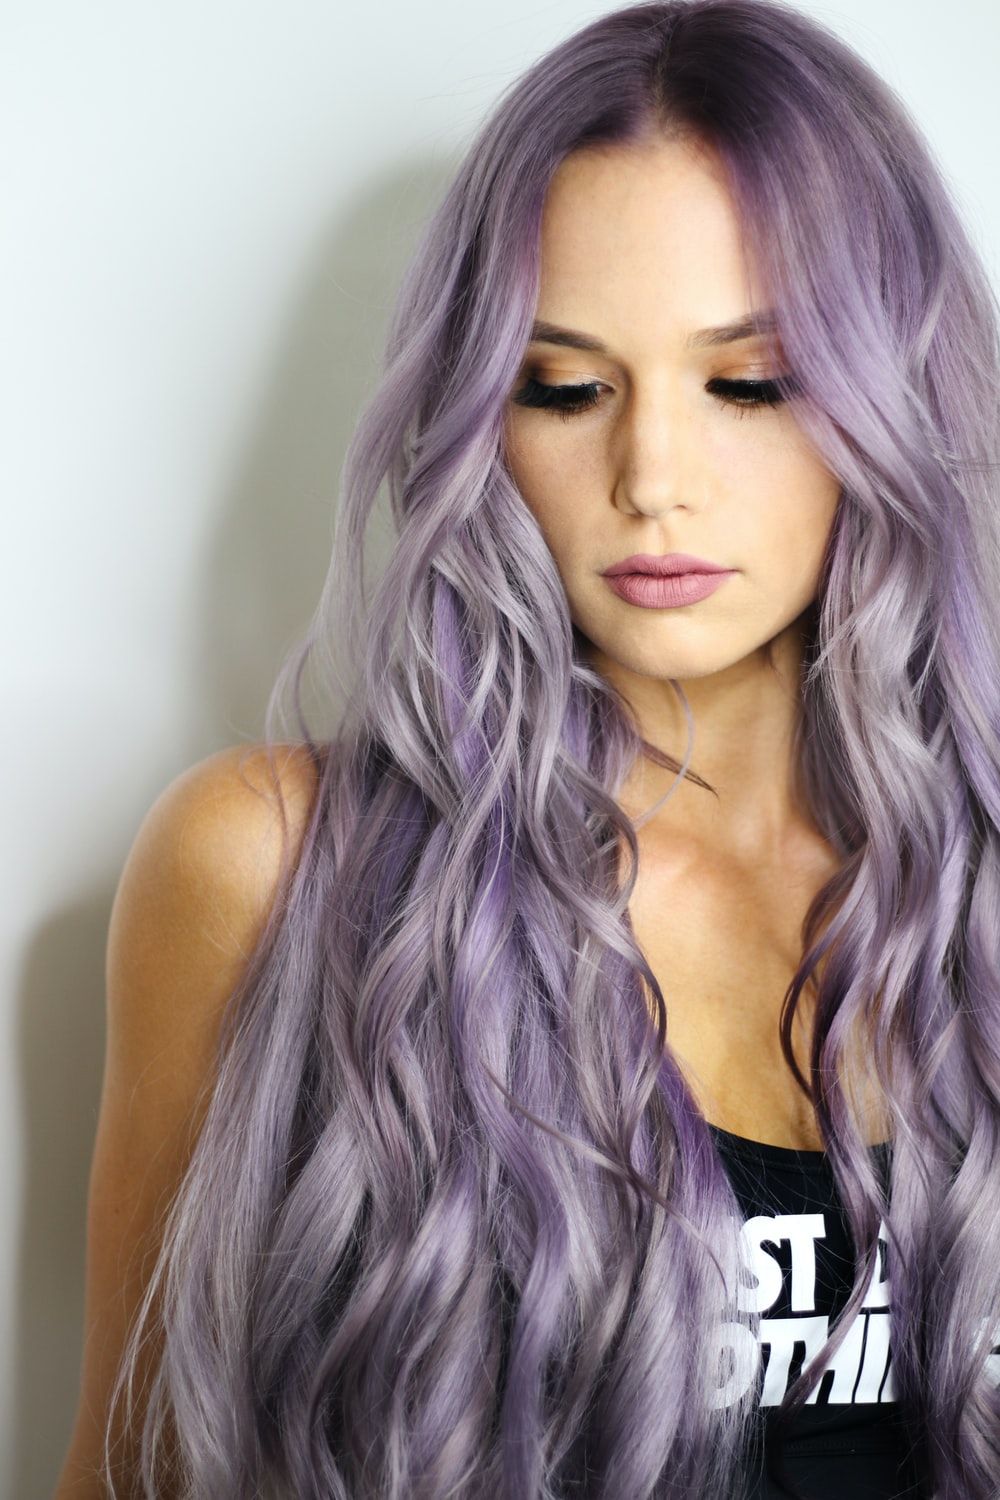 Hair Dye Picture [HD]. Download Free Image